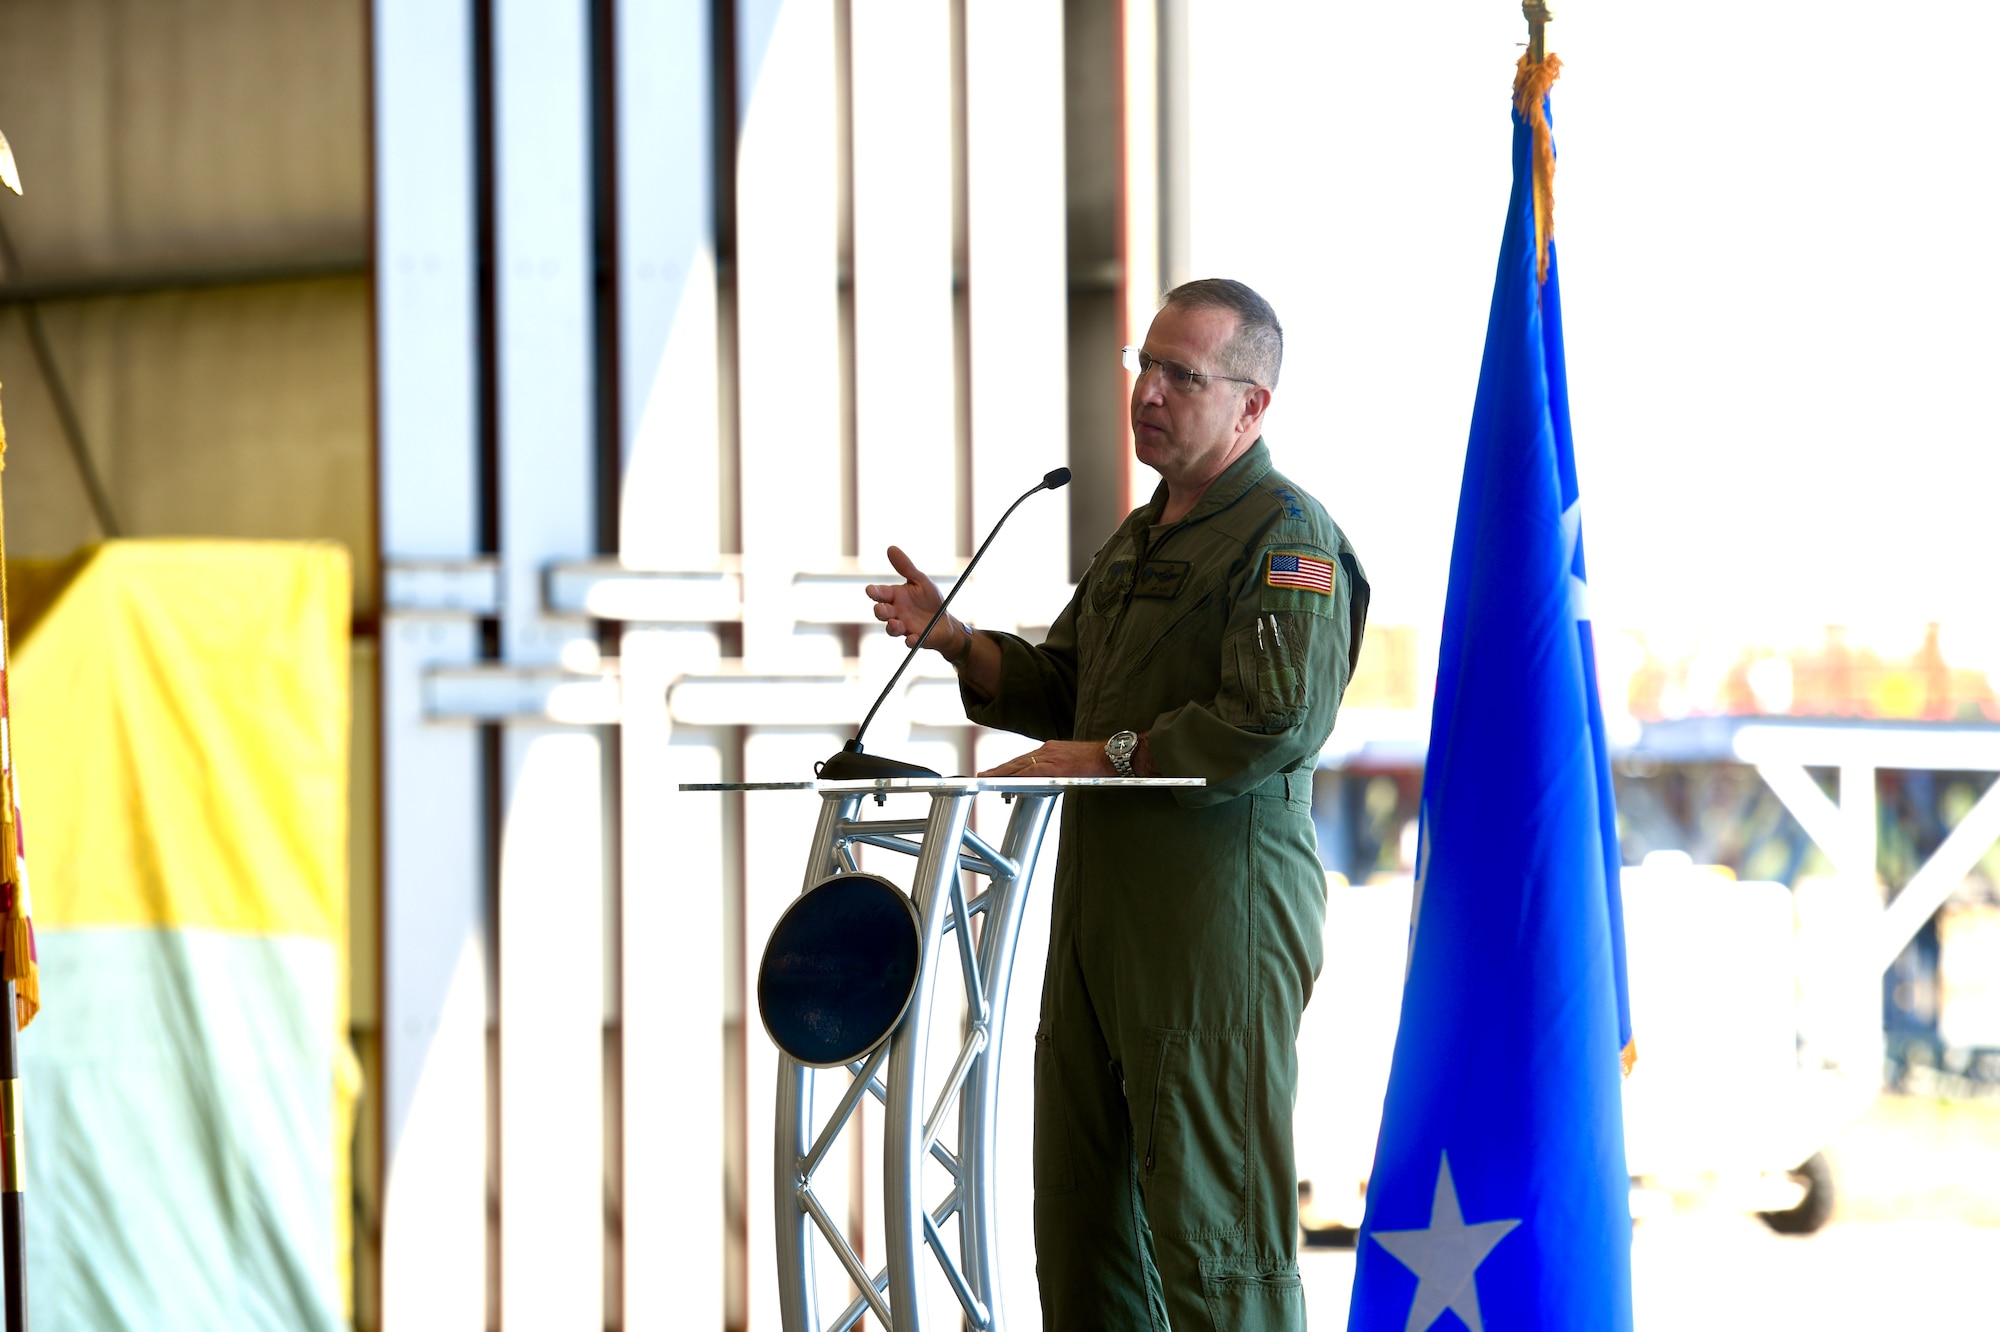 US Air Force Lieutenant General James Slife, Commander US Air Force Special Operations Command, provides remarks during the AC-130J Ghostrider Dedication and Delivery Ceremony Nov. 2, 2022, at Bob Sikes Airport in Crestview, Florida. Lieutenant General Slife, represented the command at the ceremony and spoke about his experience with acquiring and receiving the AC-130J.